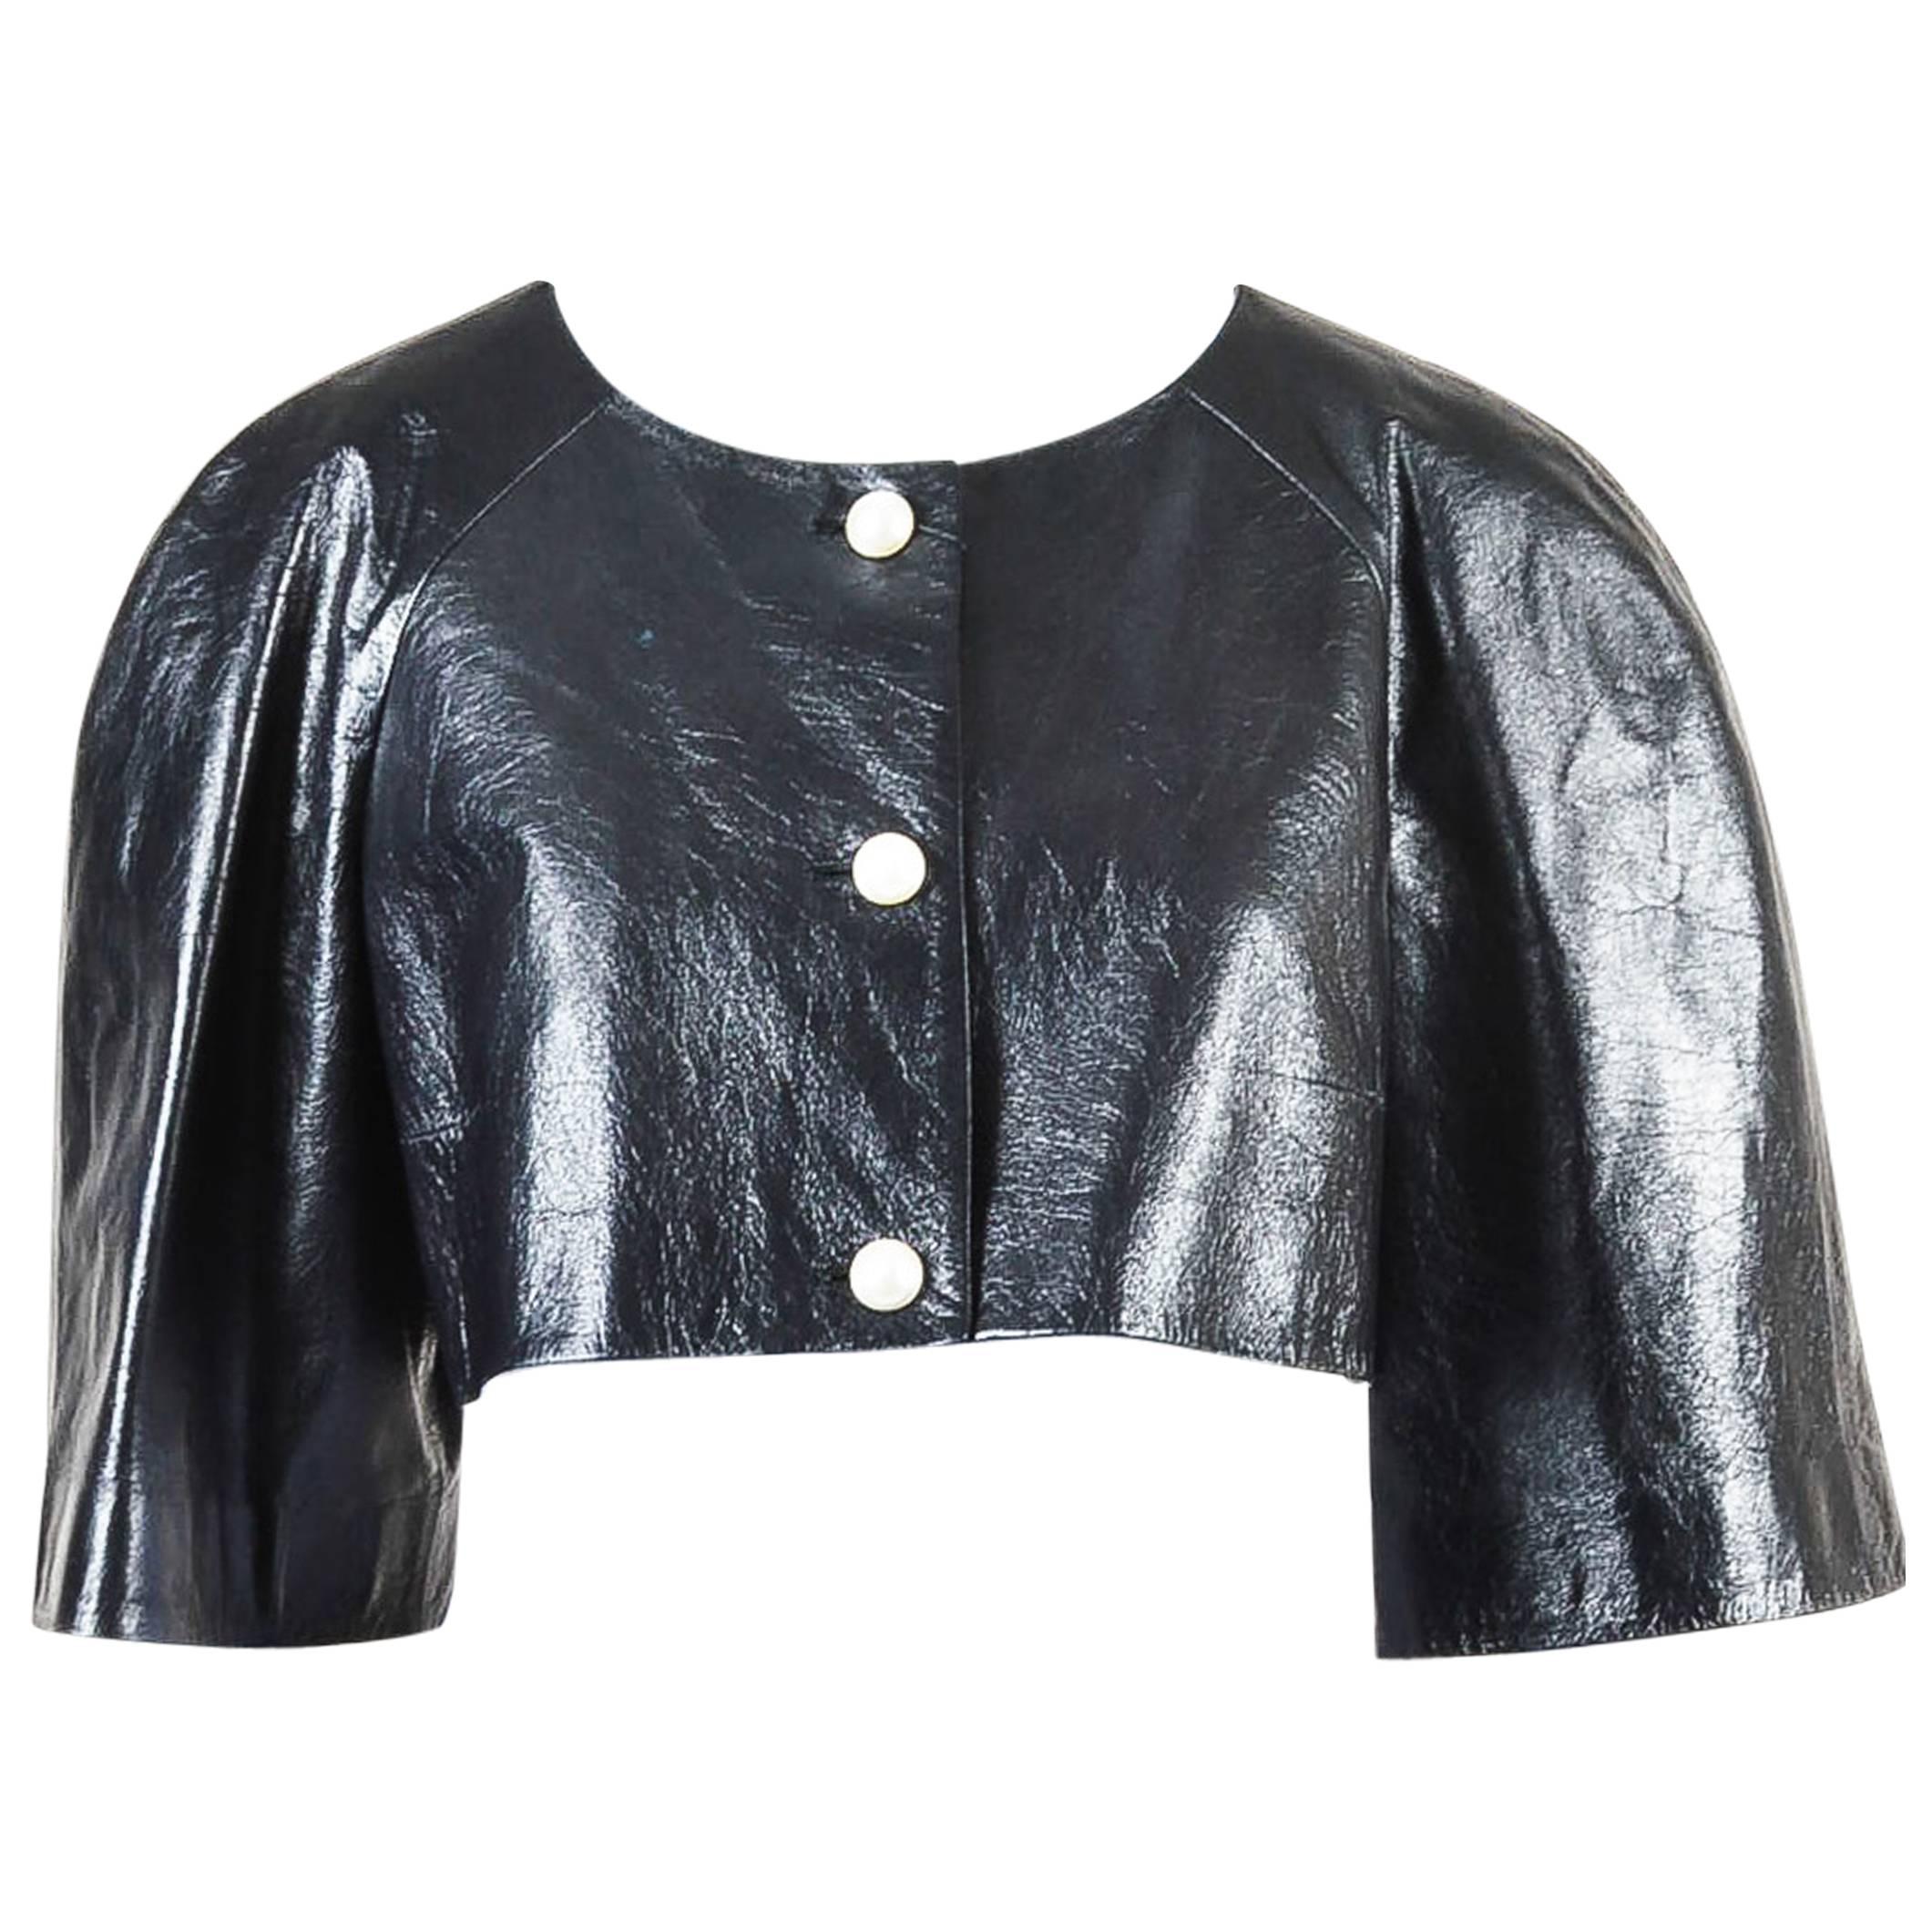 Chanel Black Leather Pearl 'CC' Buttons Cropped 3 Quarter Sleeve Jacket Size 44 For Sale